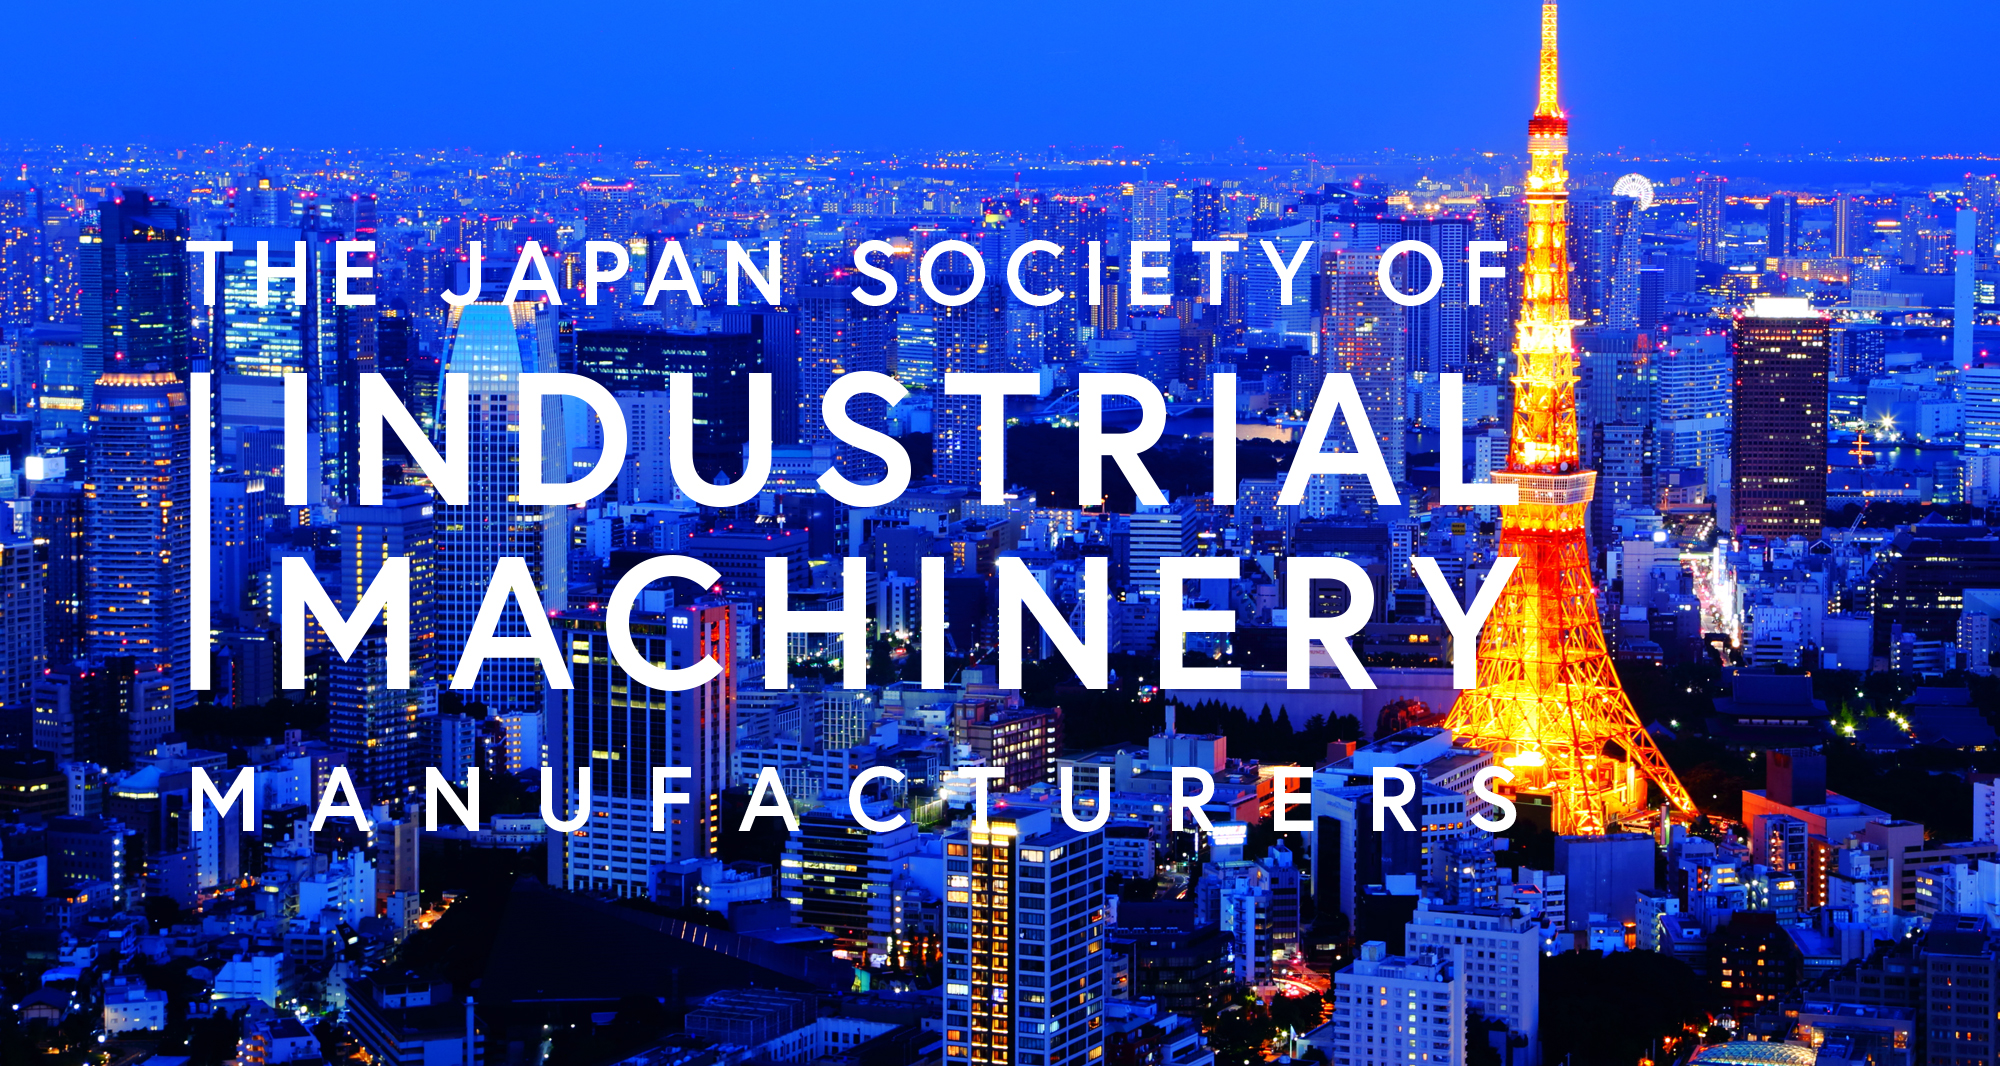 The Japan Society of Industrial Machinery Manufacturers